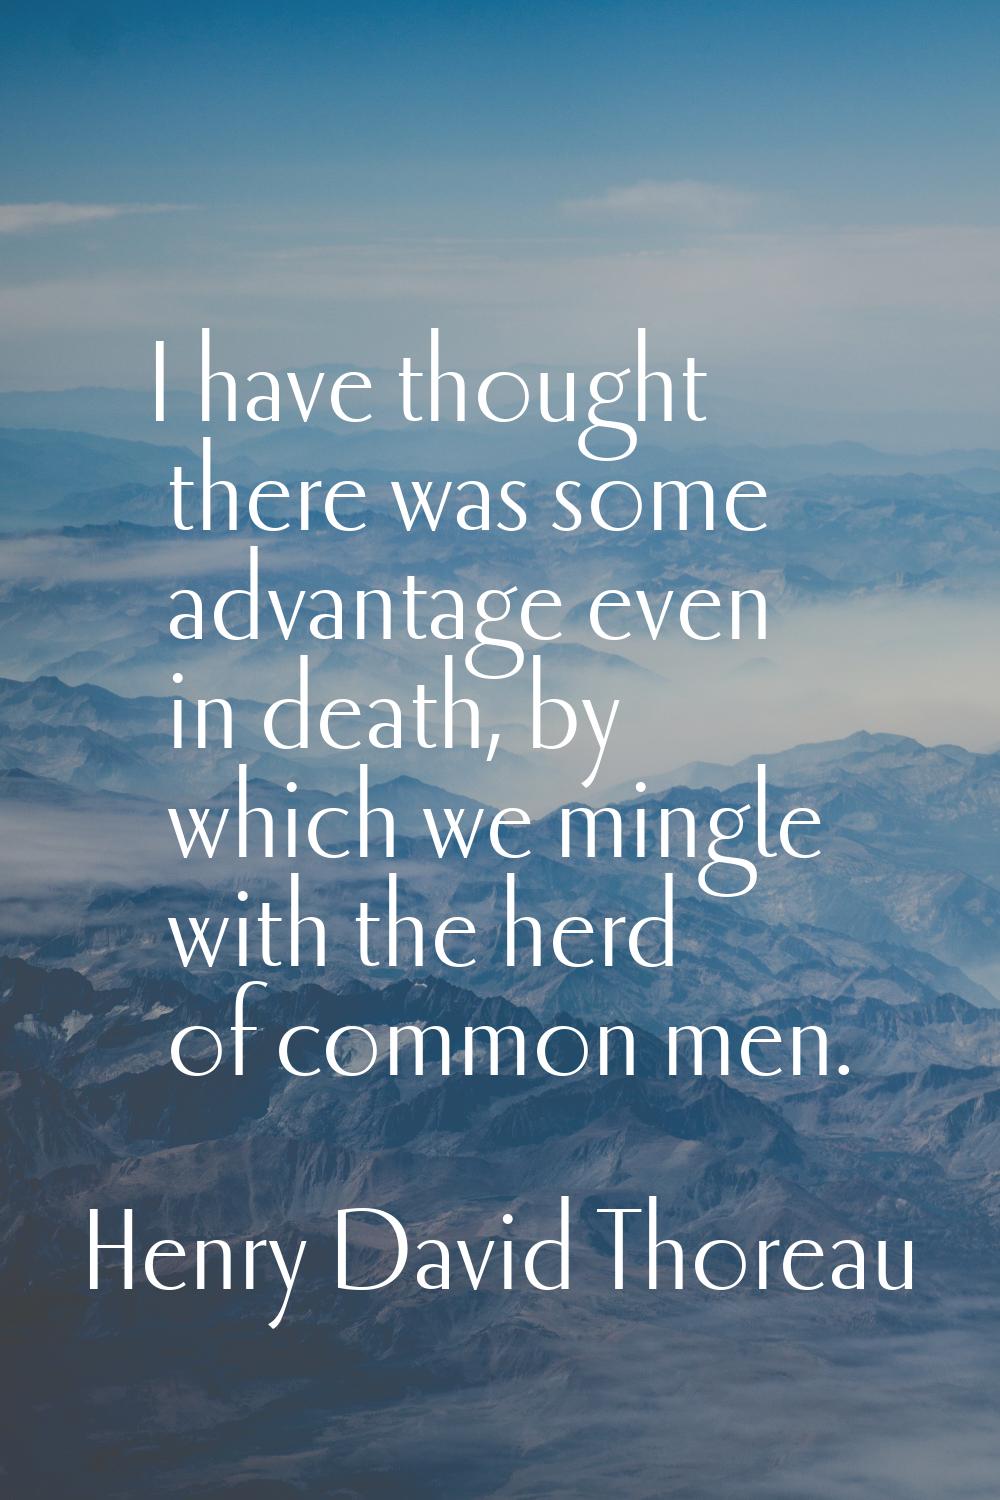 I have thought there was some advantage even in death, by which we mingle with the herd of common m